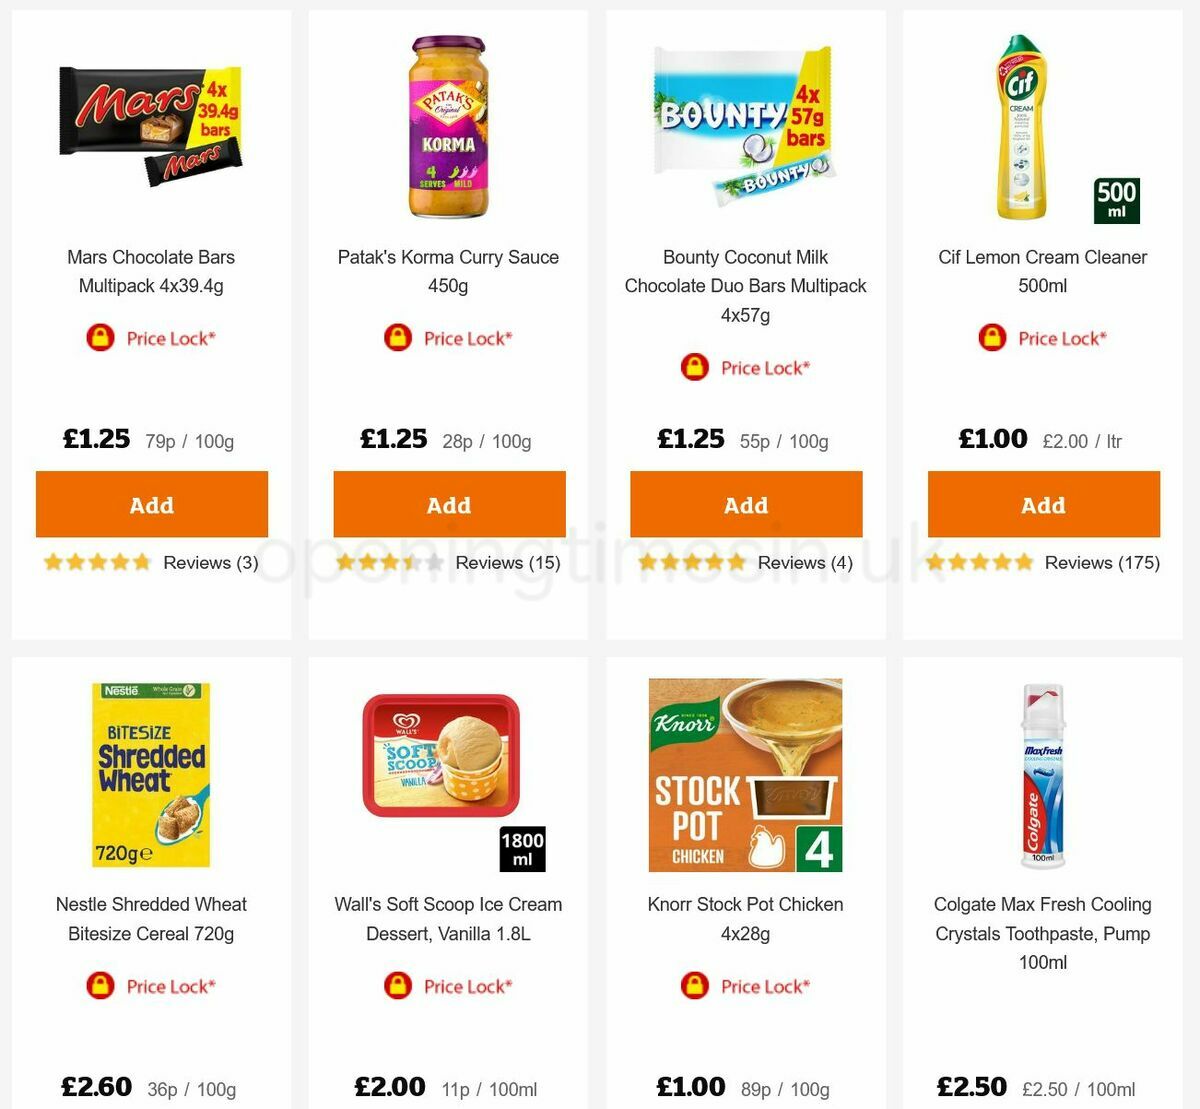 Sainsbury's Offers from 19 November